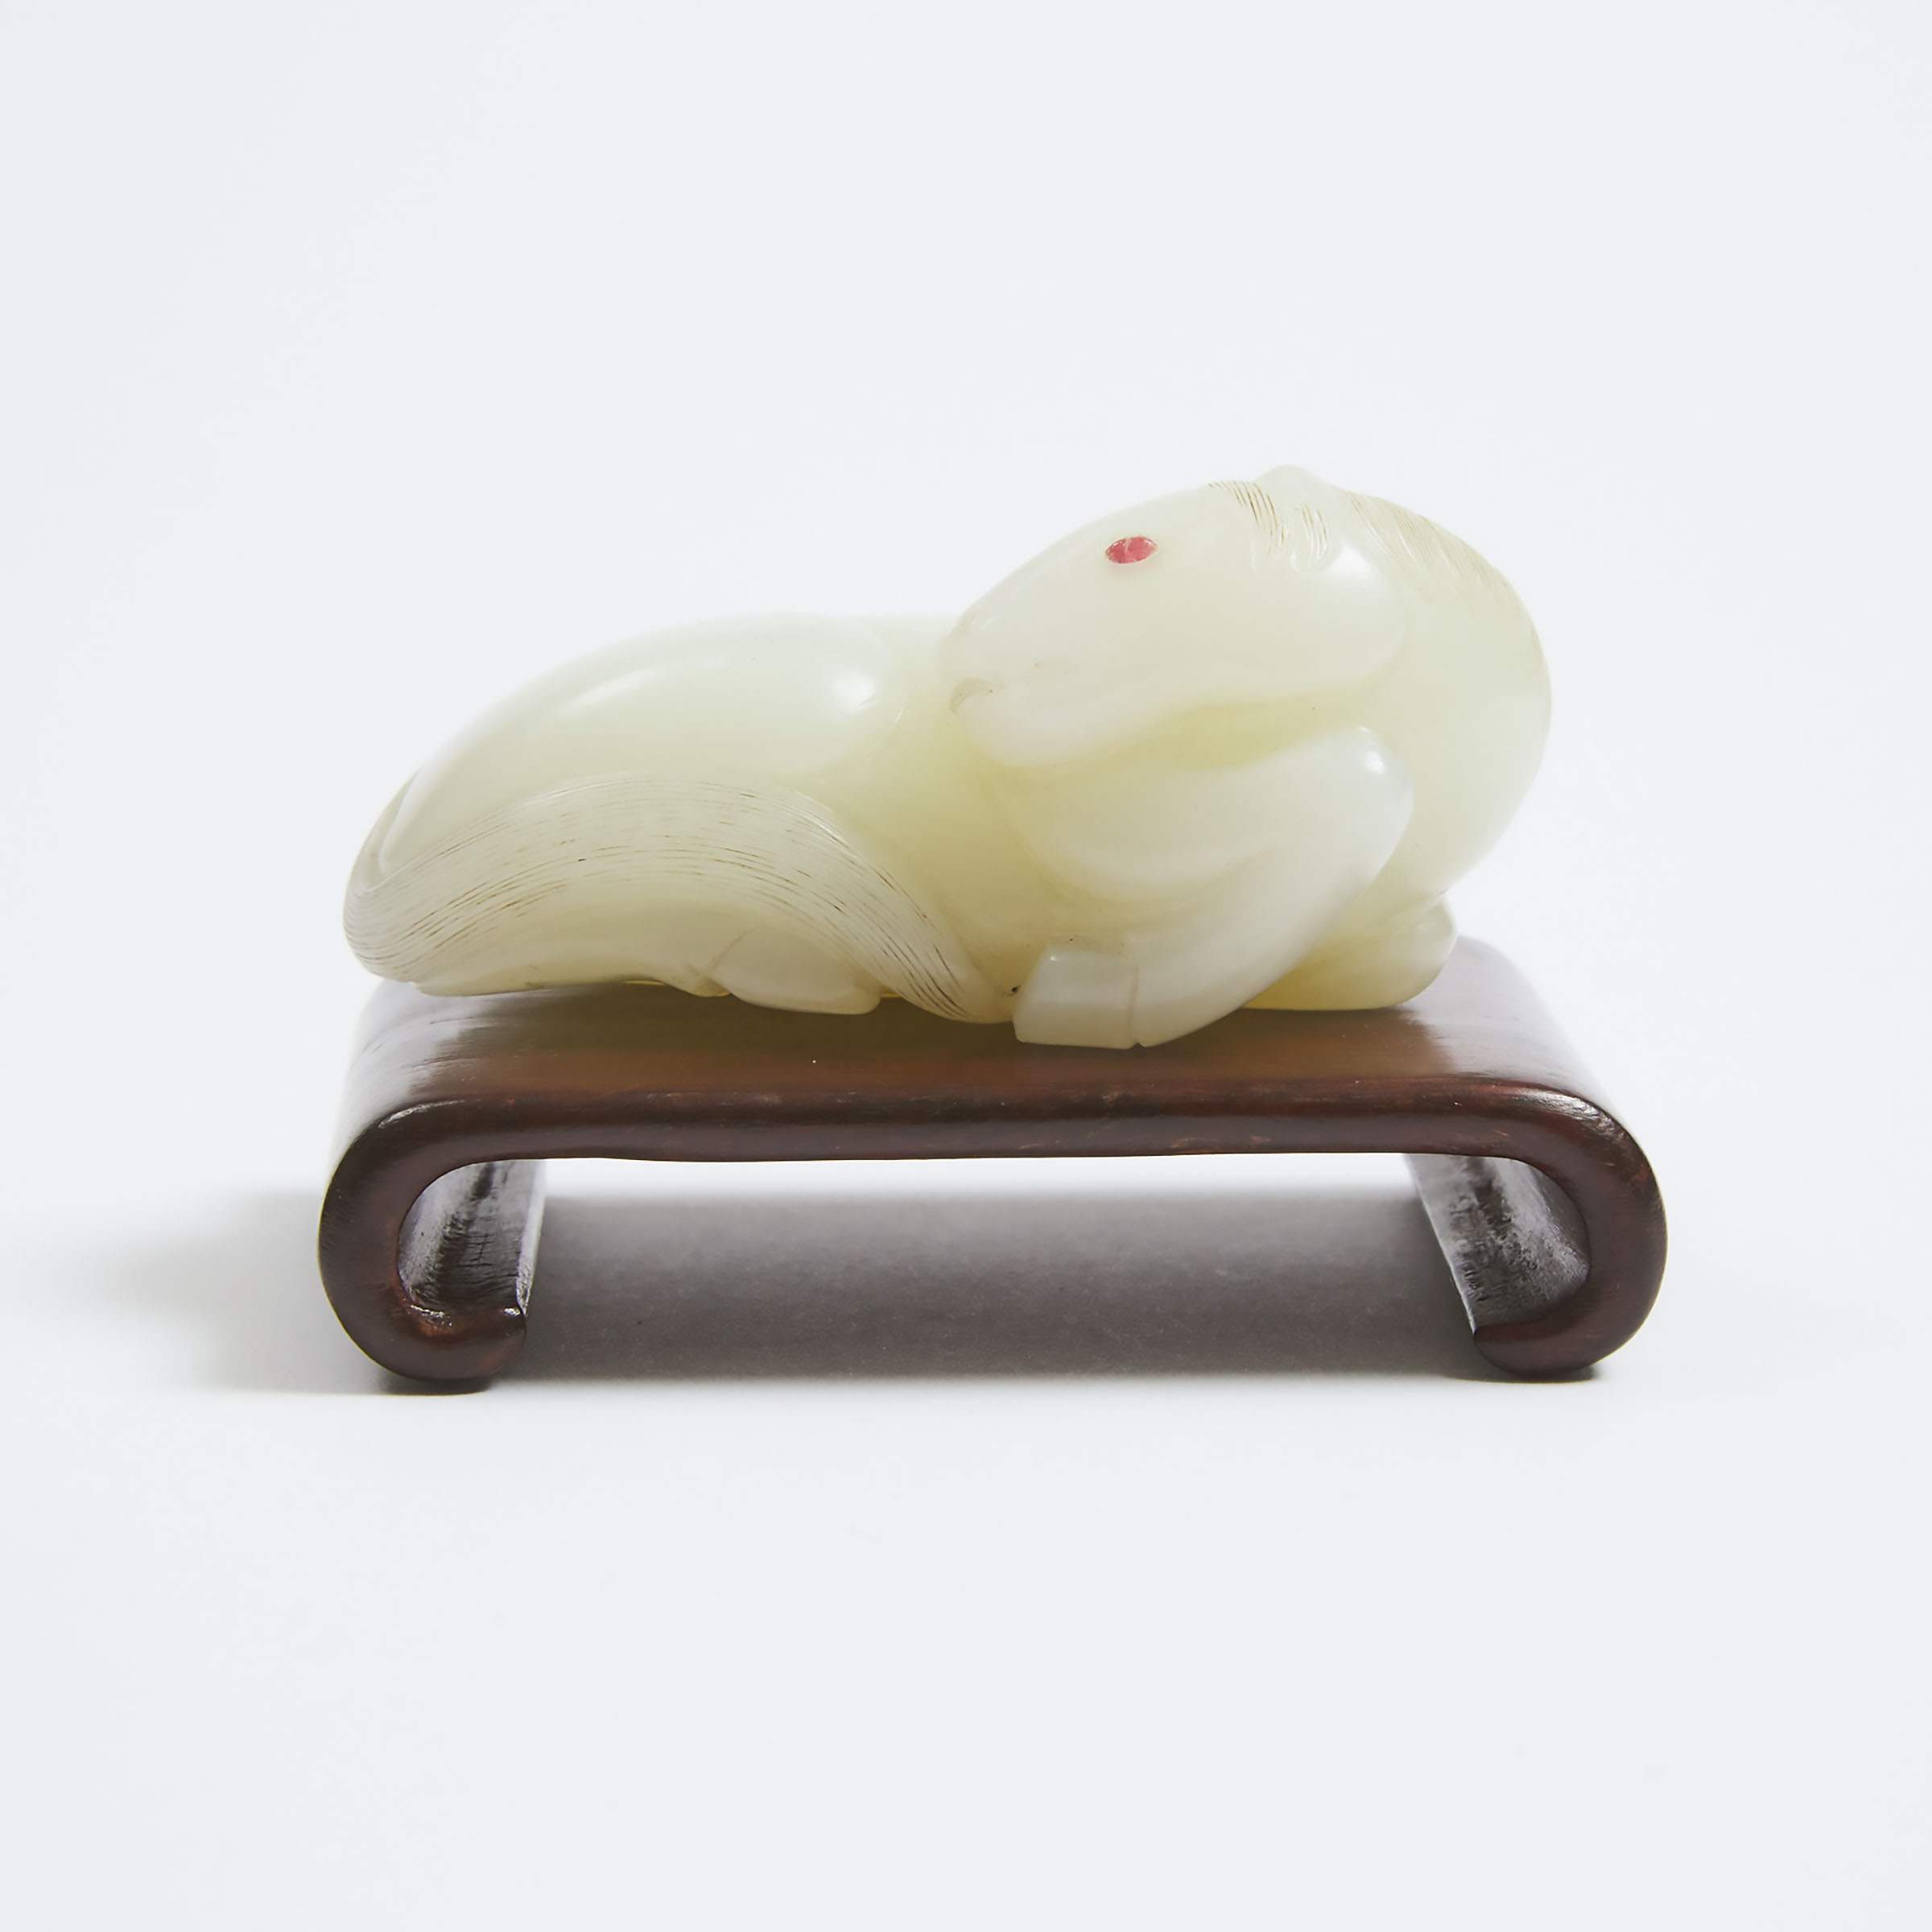 An Exceptional and Finely Carved White Jade Recumbent Horse, Qing Dynasty, Qianlong Period (1736-1795)